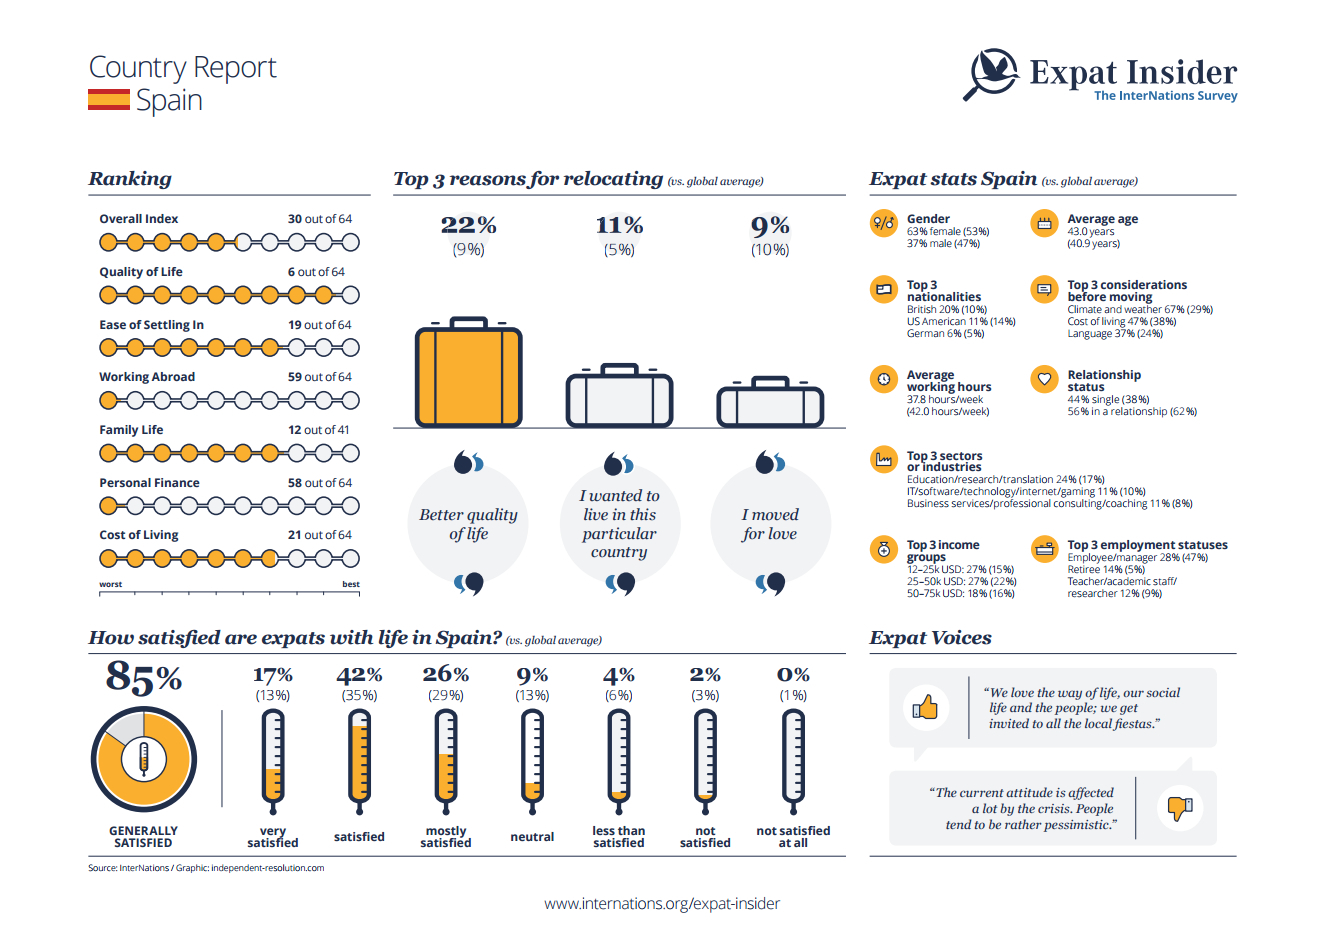 Expat statistics for Spain - infographic